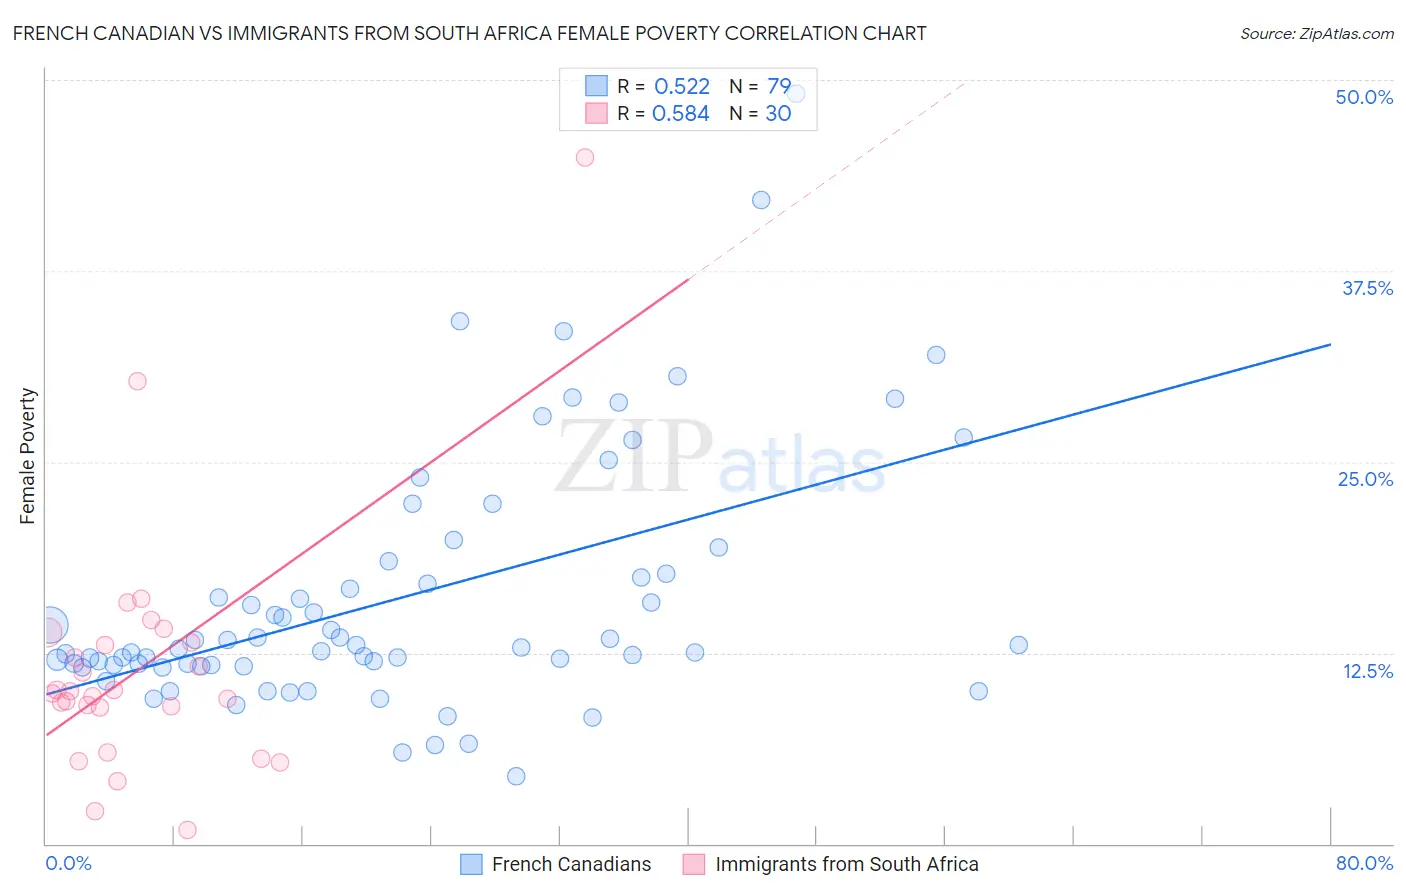 French Canadian vs Immigrants from South Africa Female Poverty